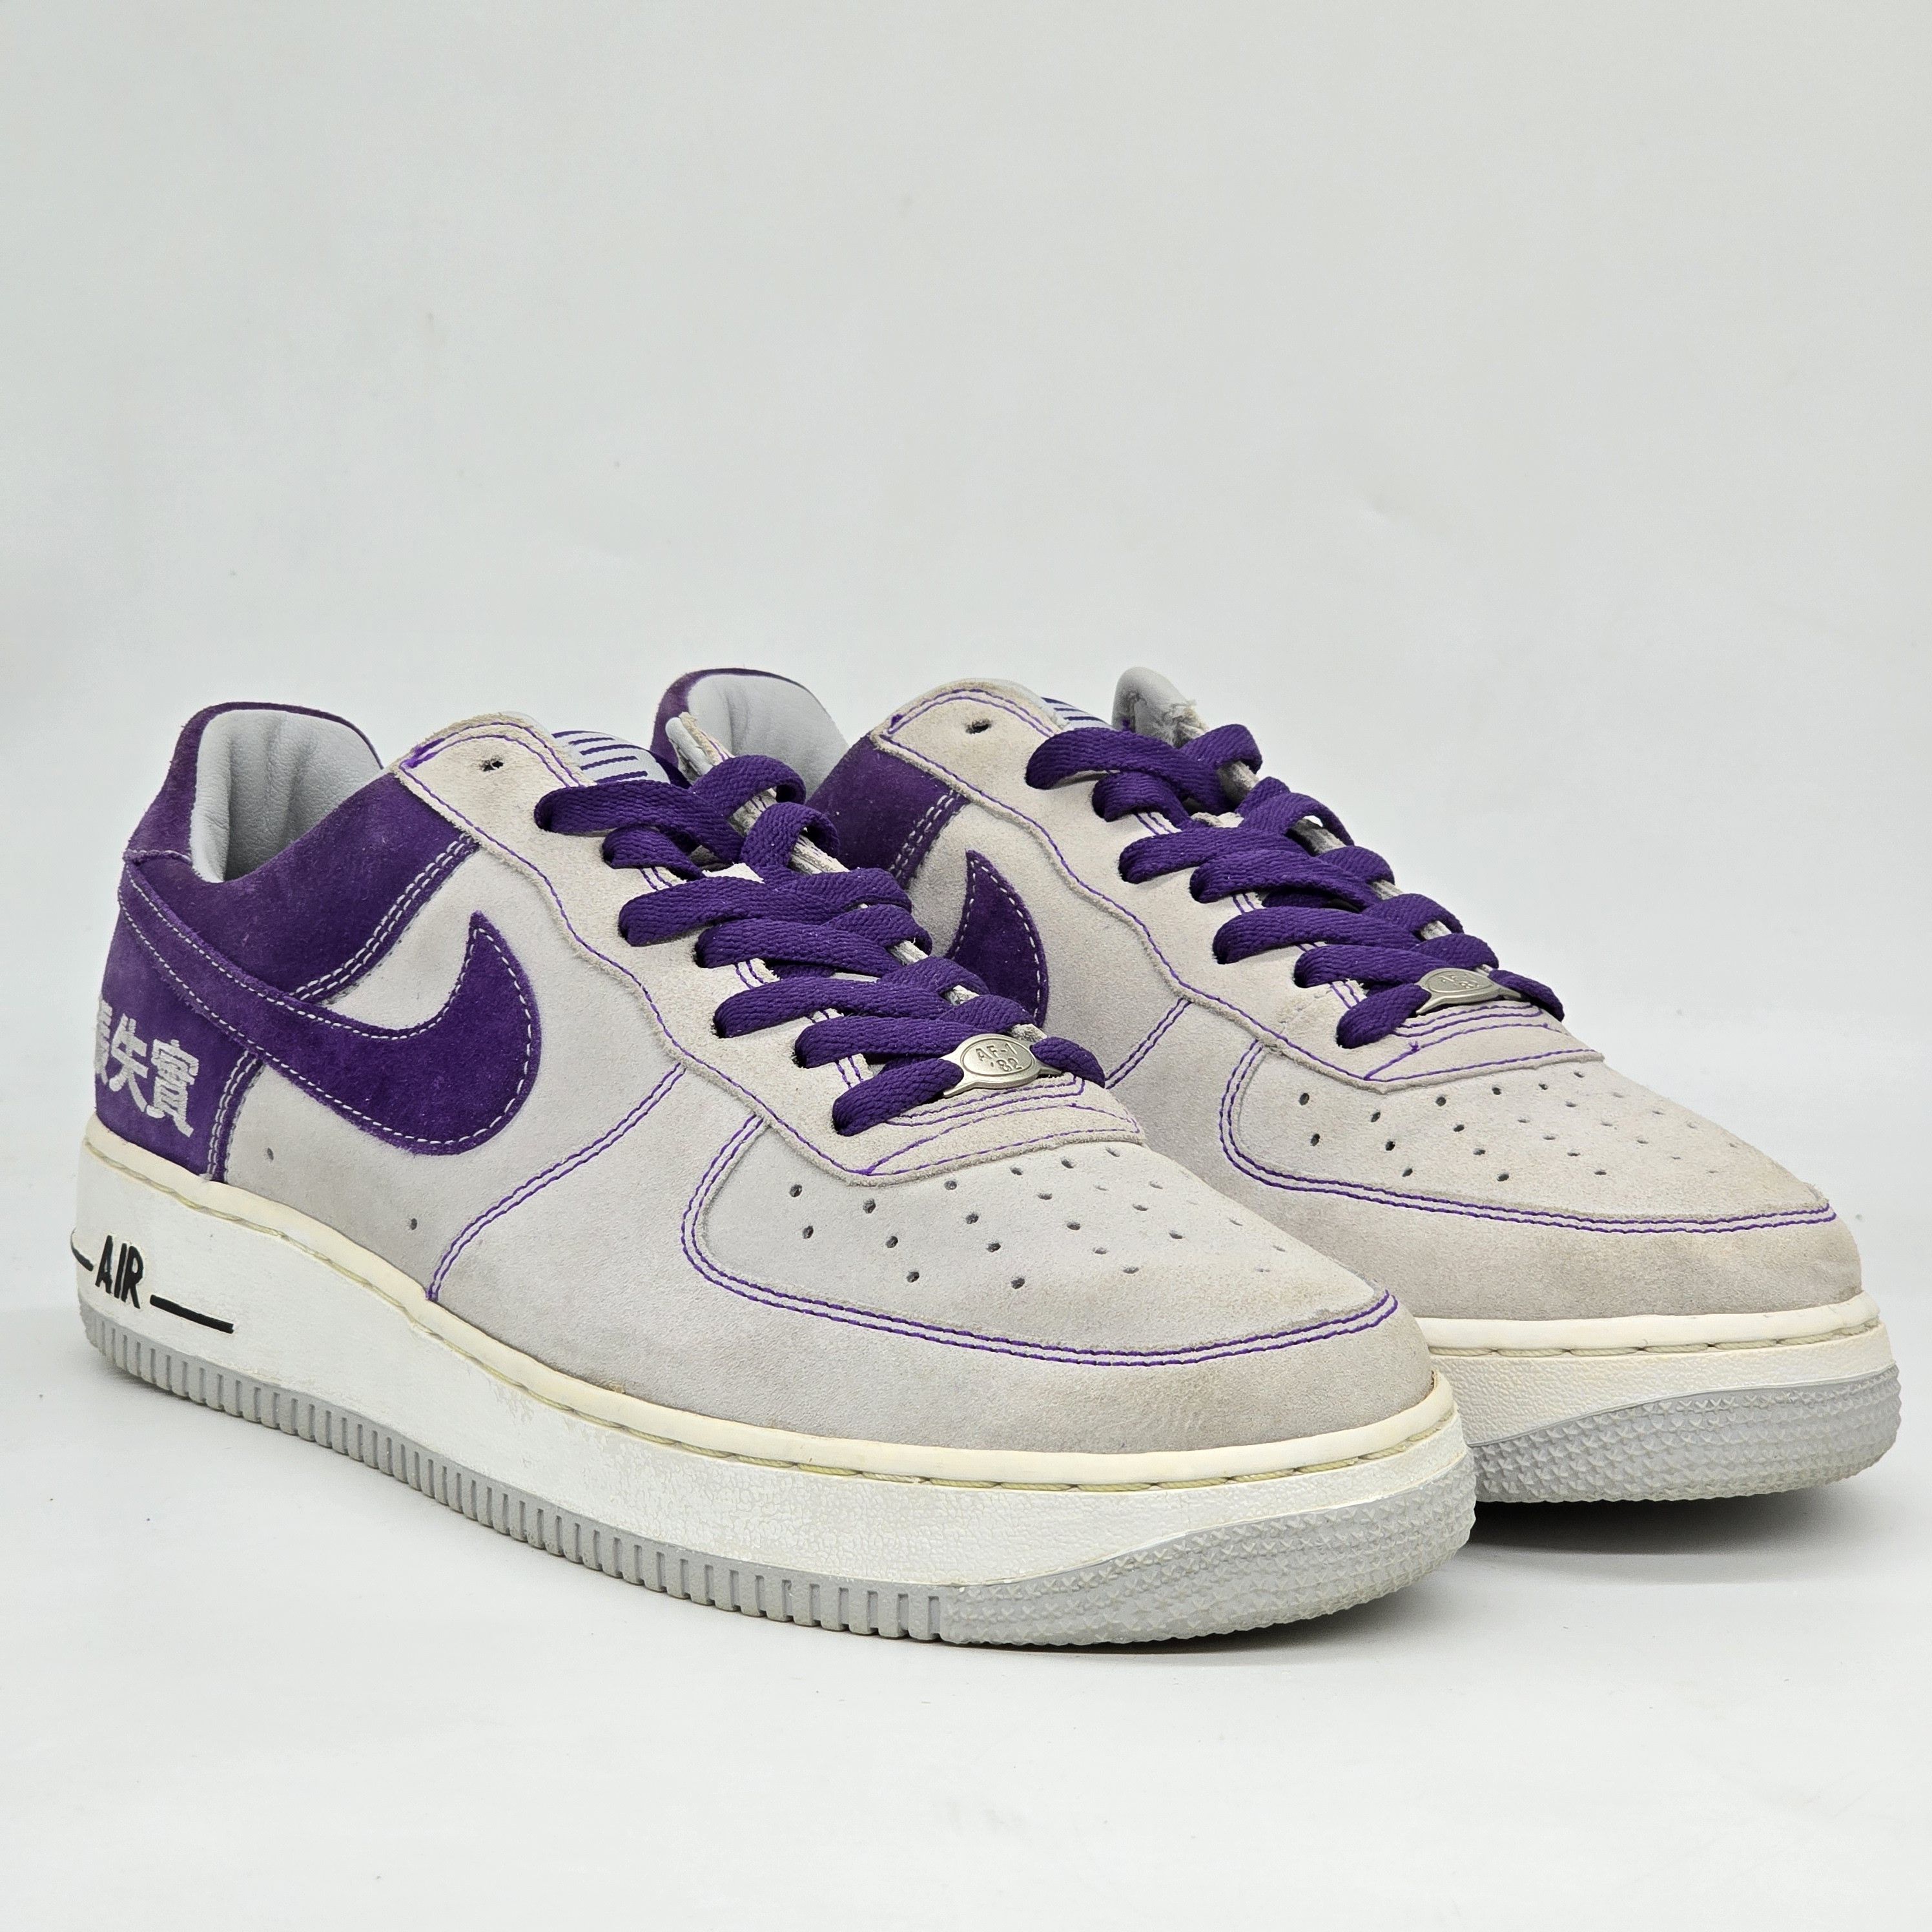 Nike - 2005 Airforce 1 Chamber of Fear "Hype" - 2